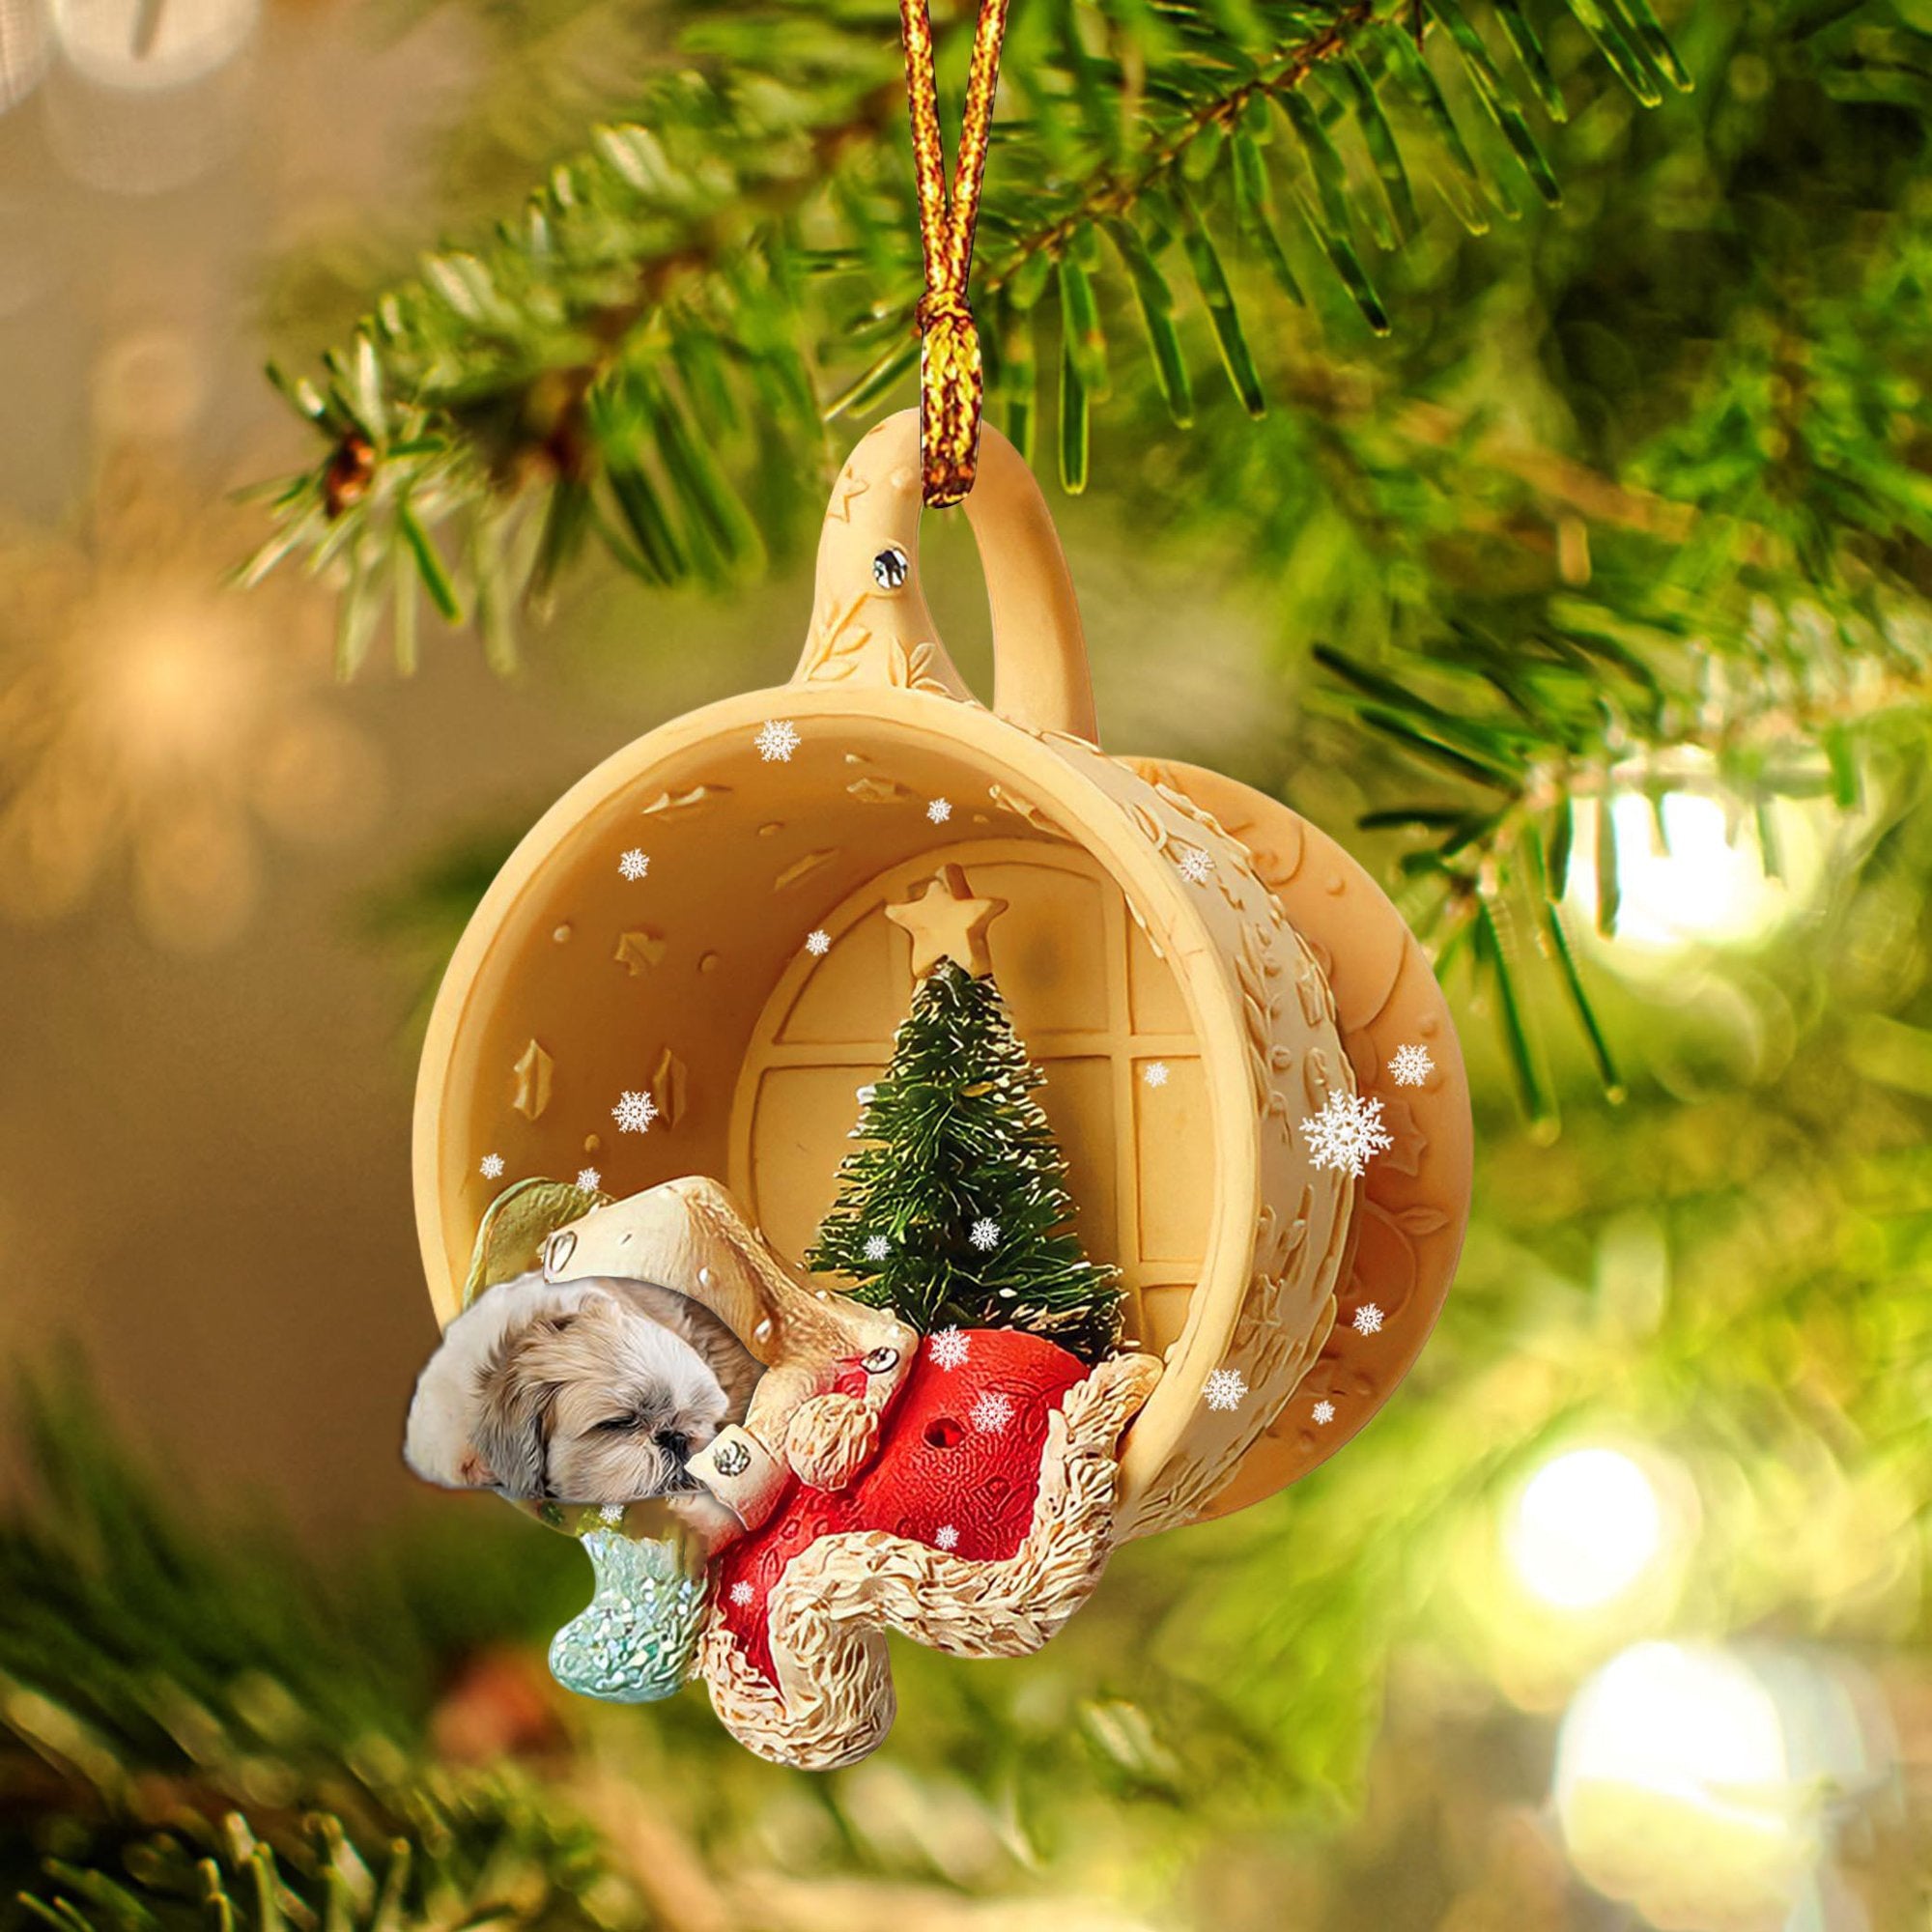 Shih Tzu Sleeping In A Cup Christmas Ornament